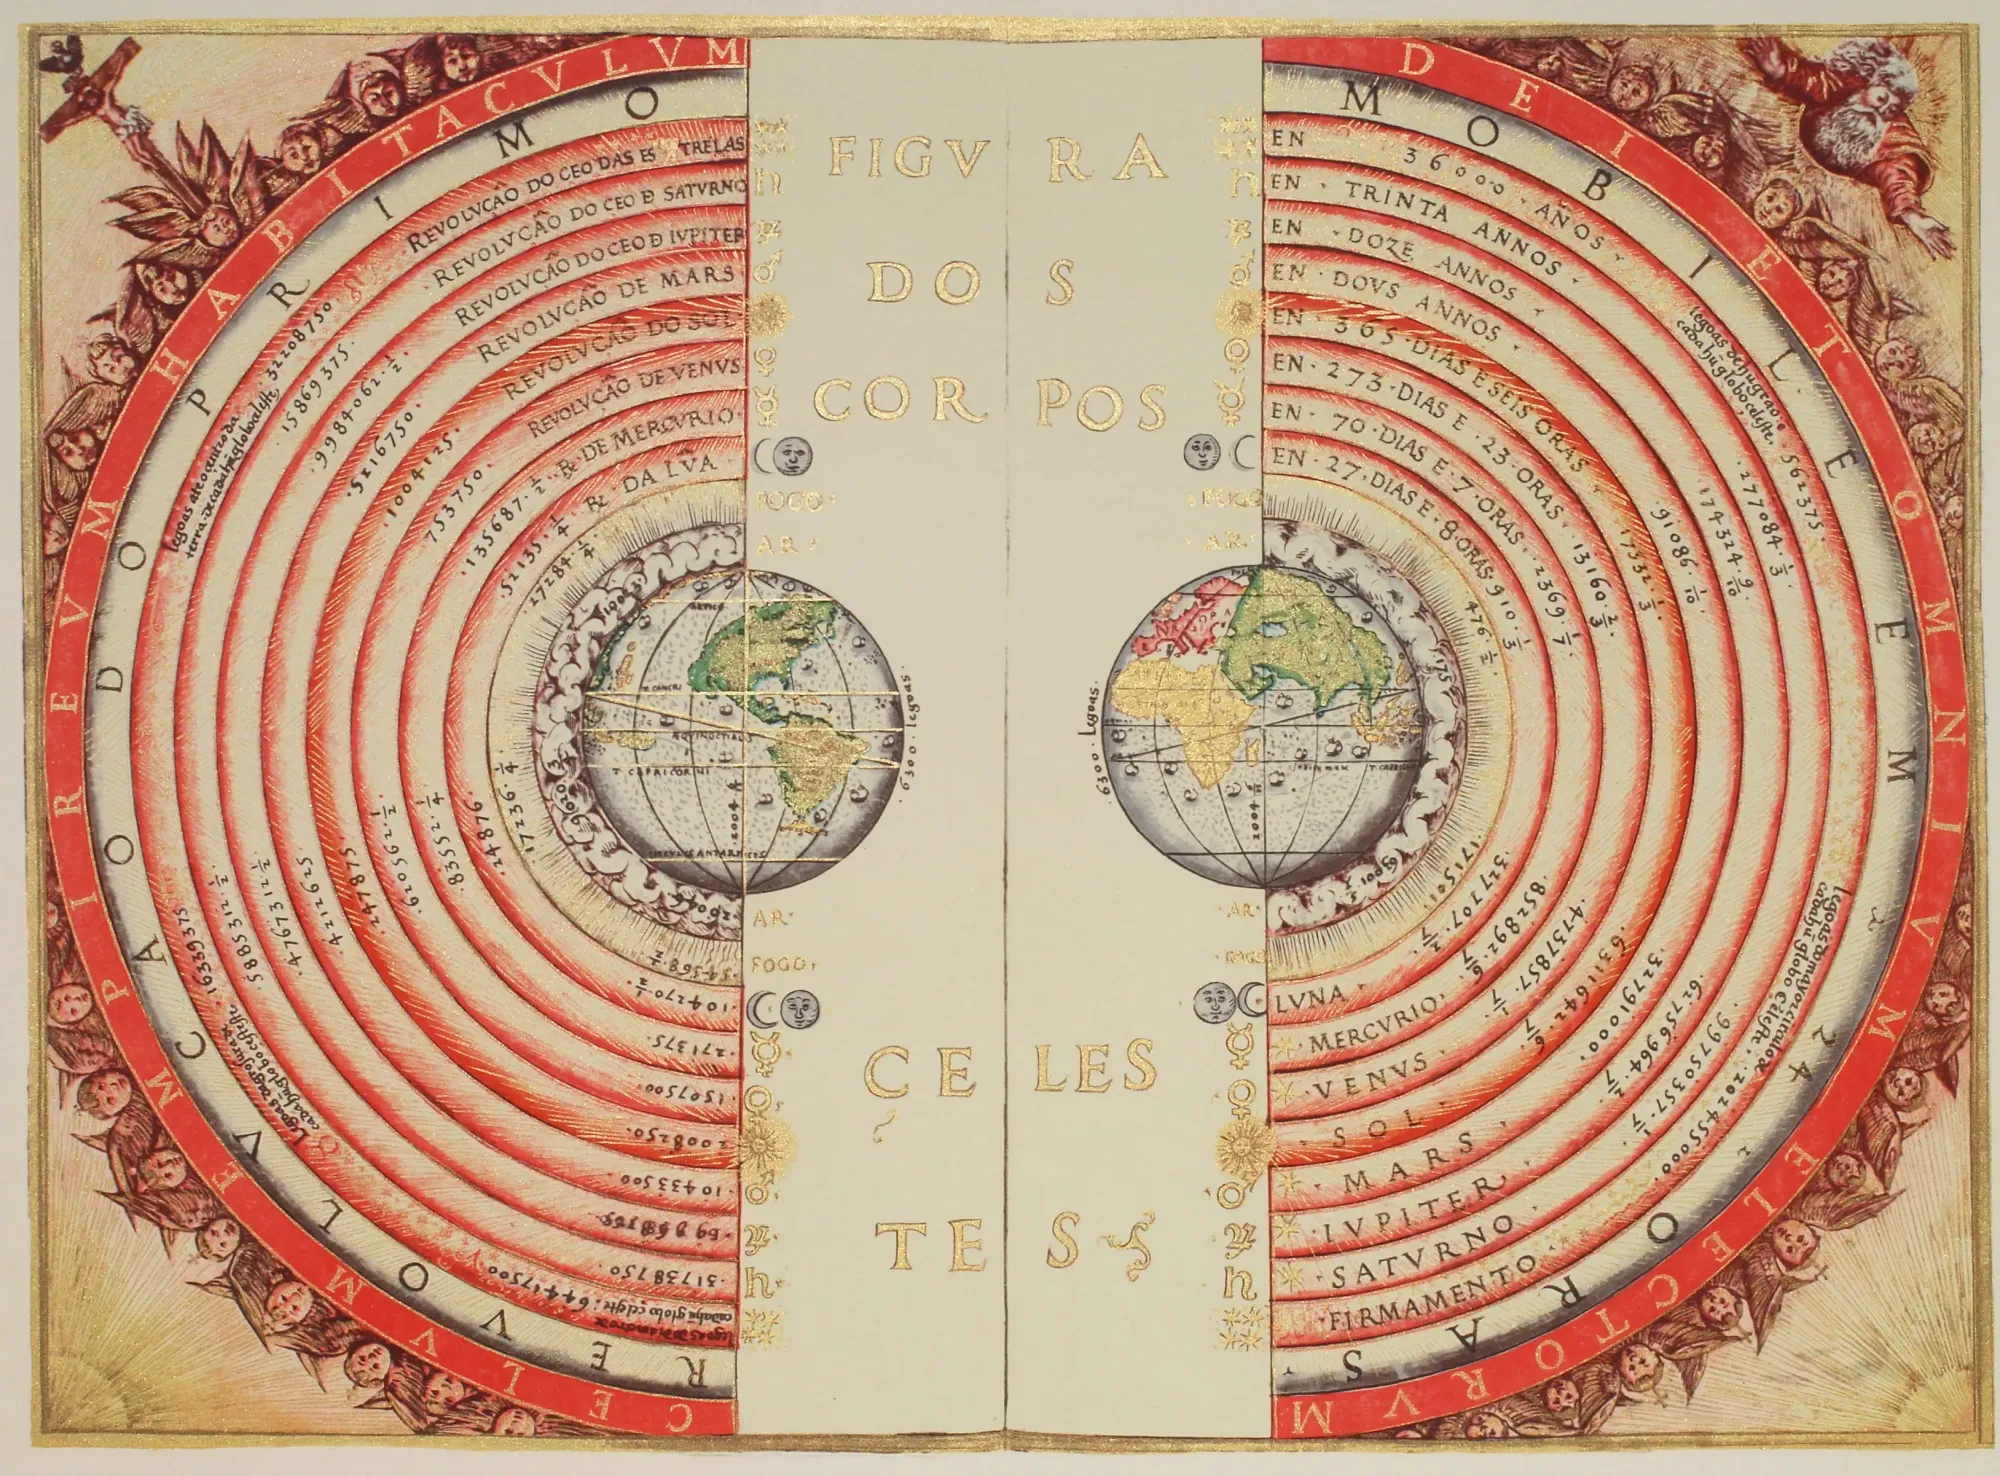 The Medieval geocentric cosmology.